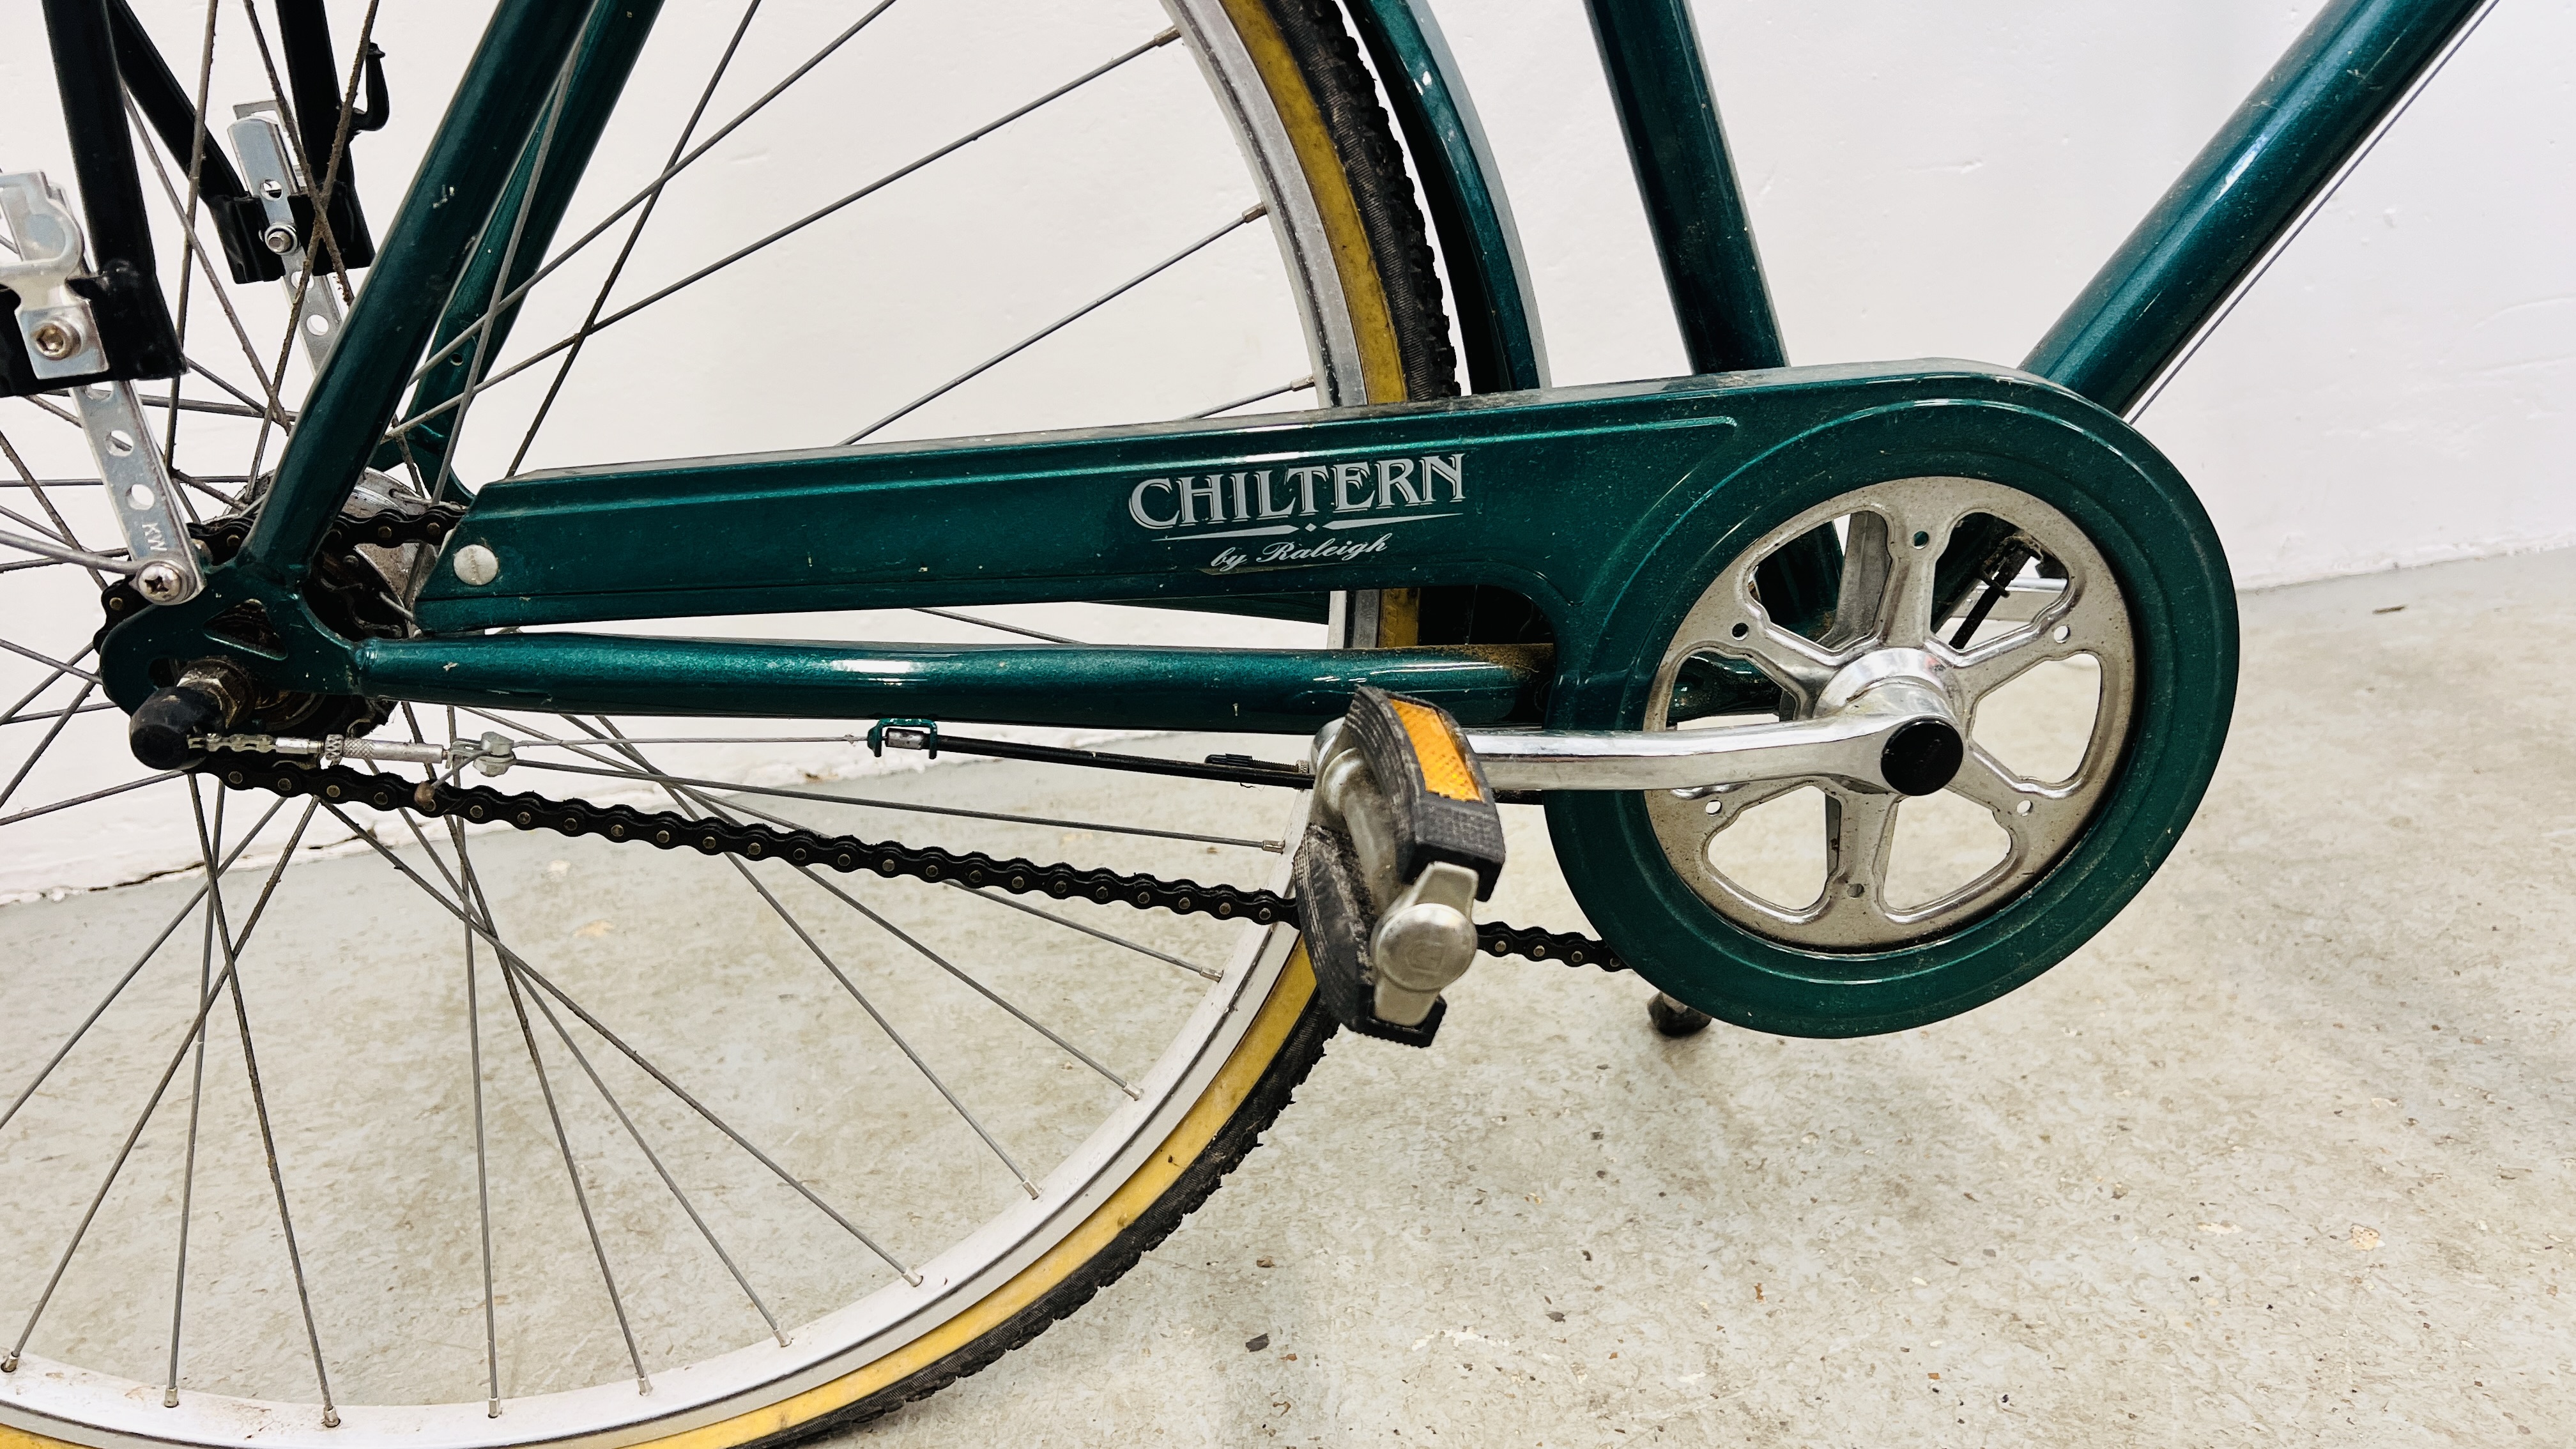 GENTLEMAN'S RALEIGH "CHILTERN" THREE SPEED BICYCLE. - Image 7 of 9